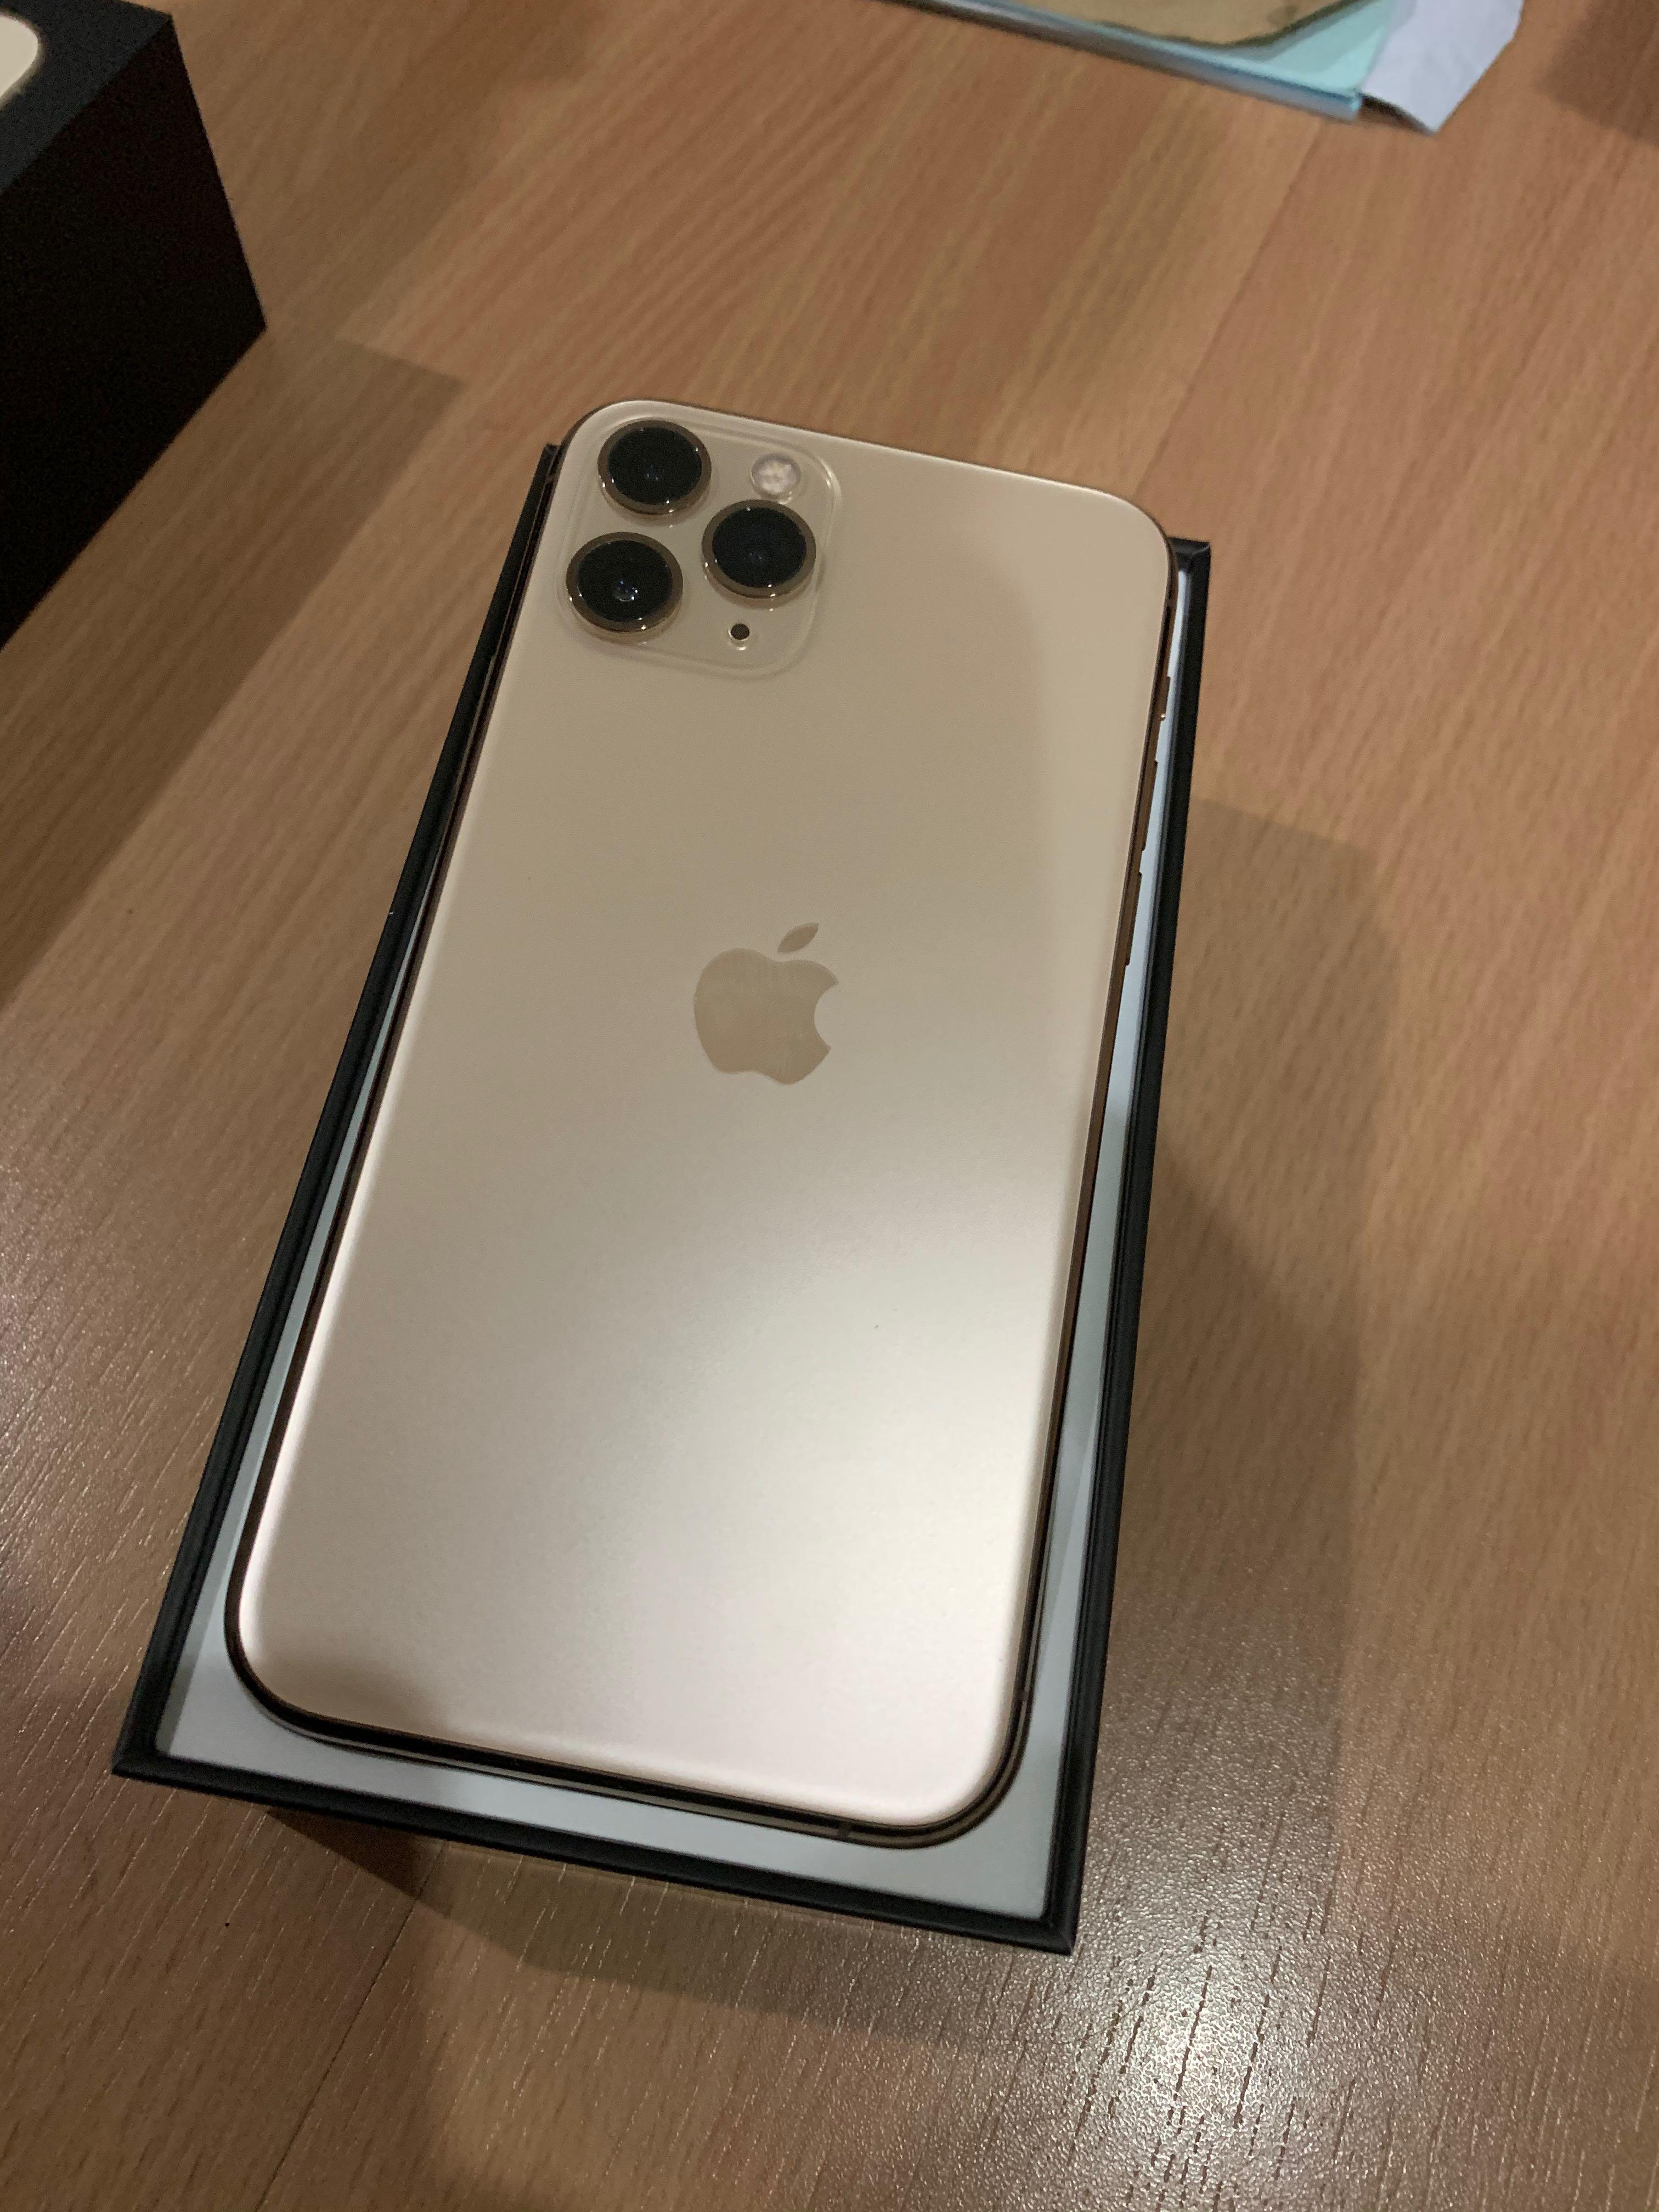 IPhone 11 Pro 64gb gold, Mobile Phones  Gadgets, Mobile Phones, iPhone, iPhone  11 Series on Carousell